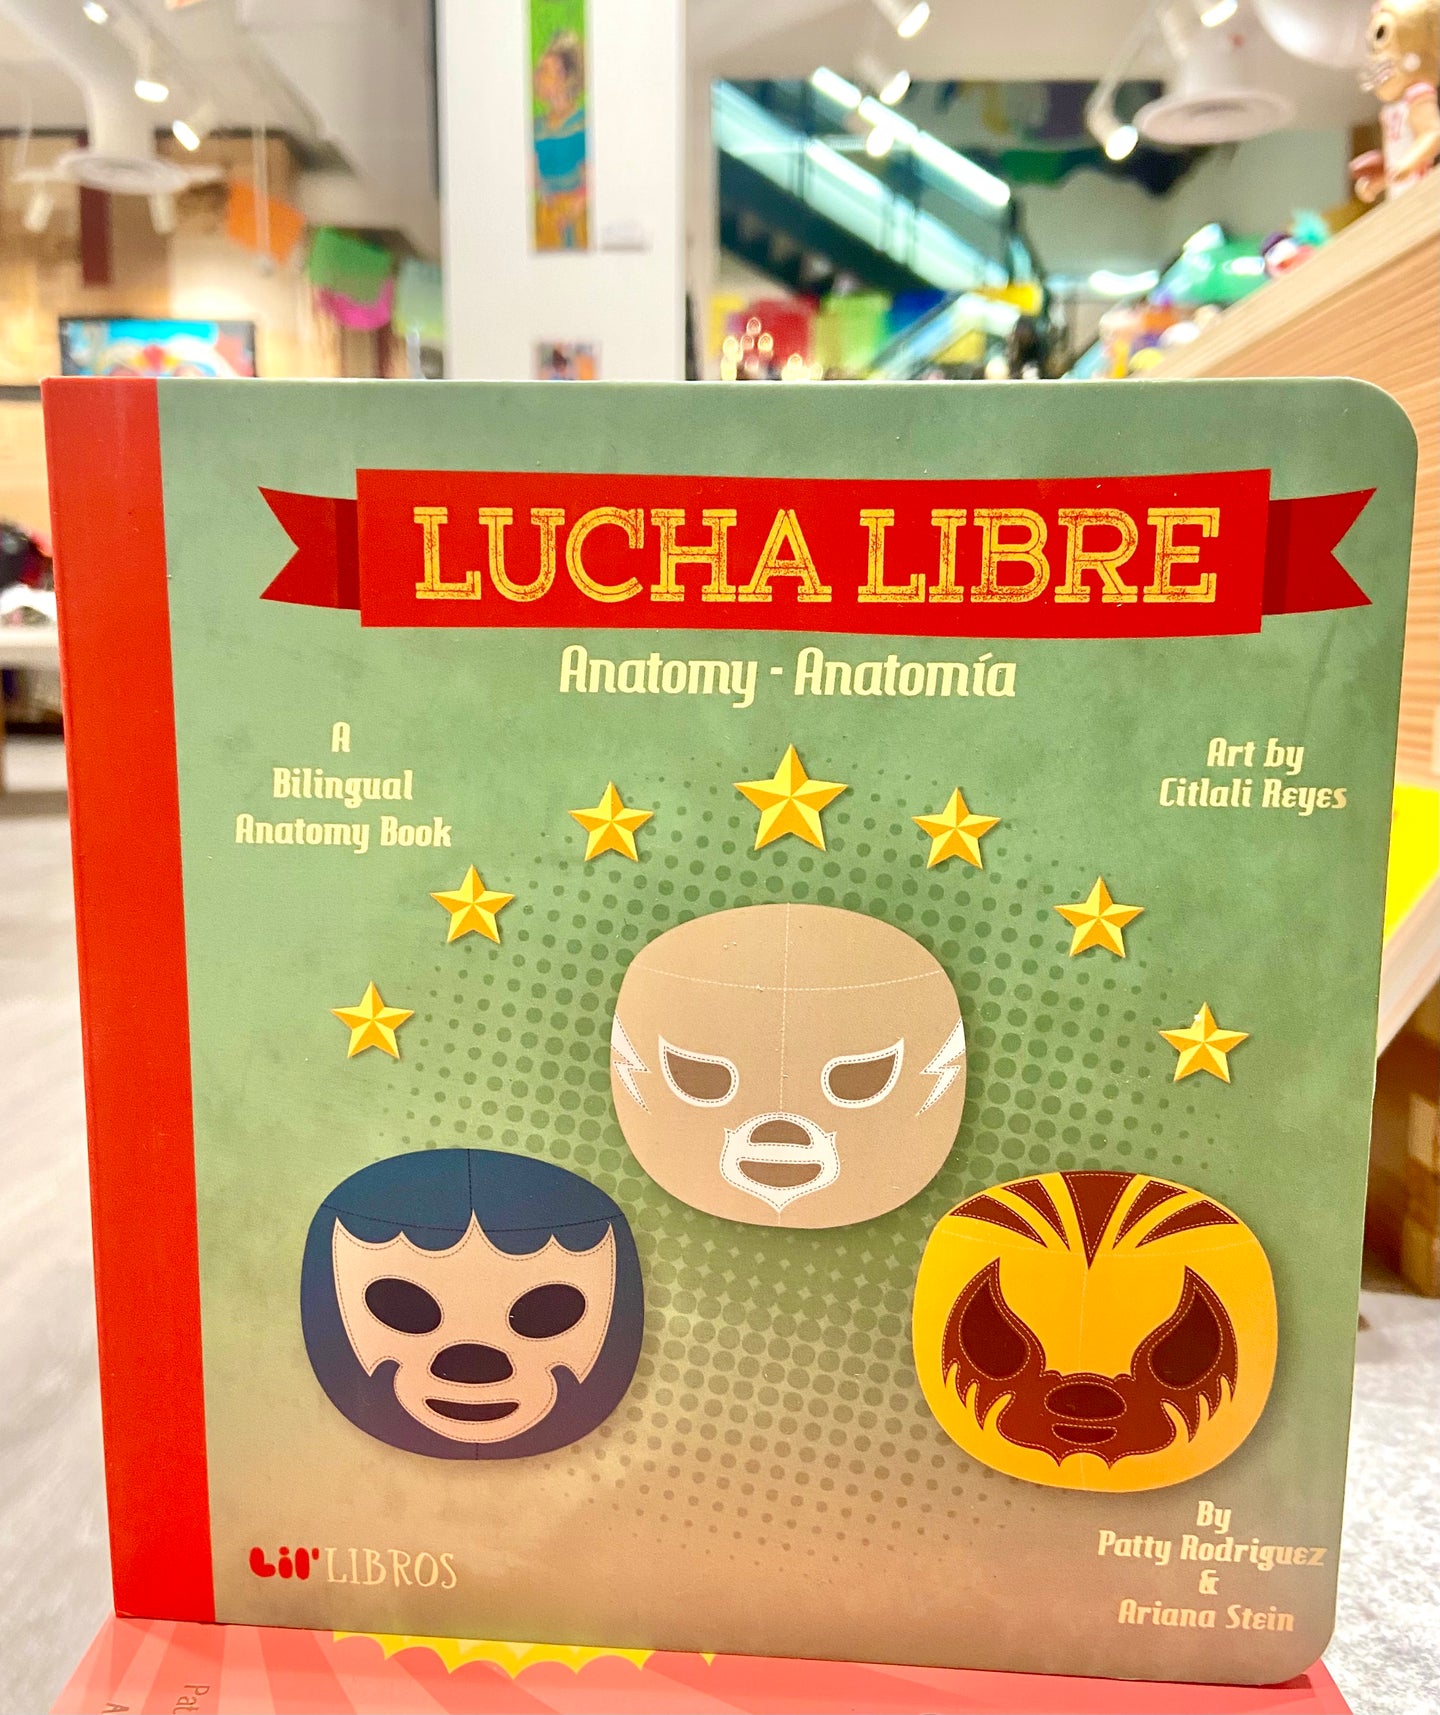 Kids’ Bilingual Book: Parts of the Body with Lucha Libre wrestlers